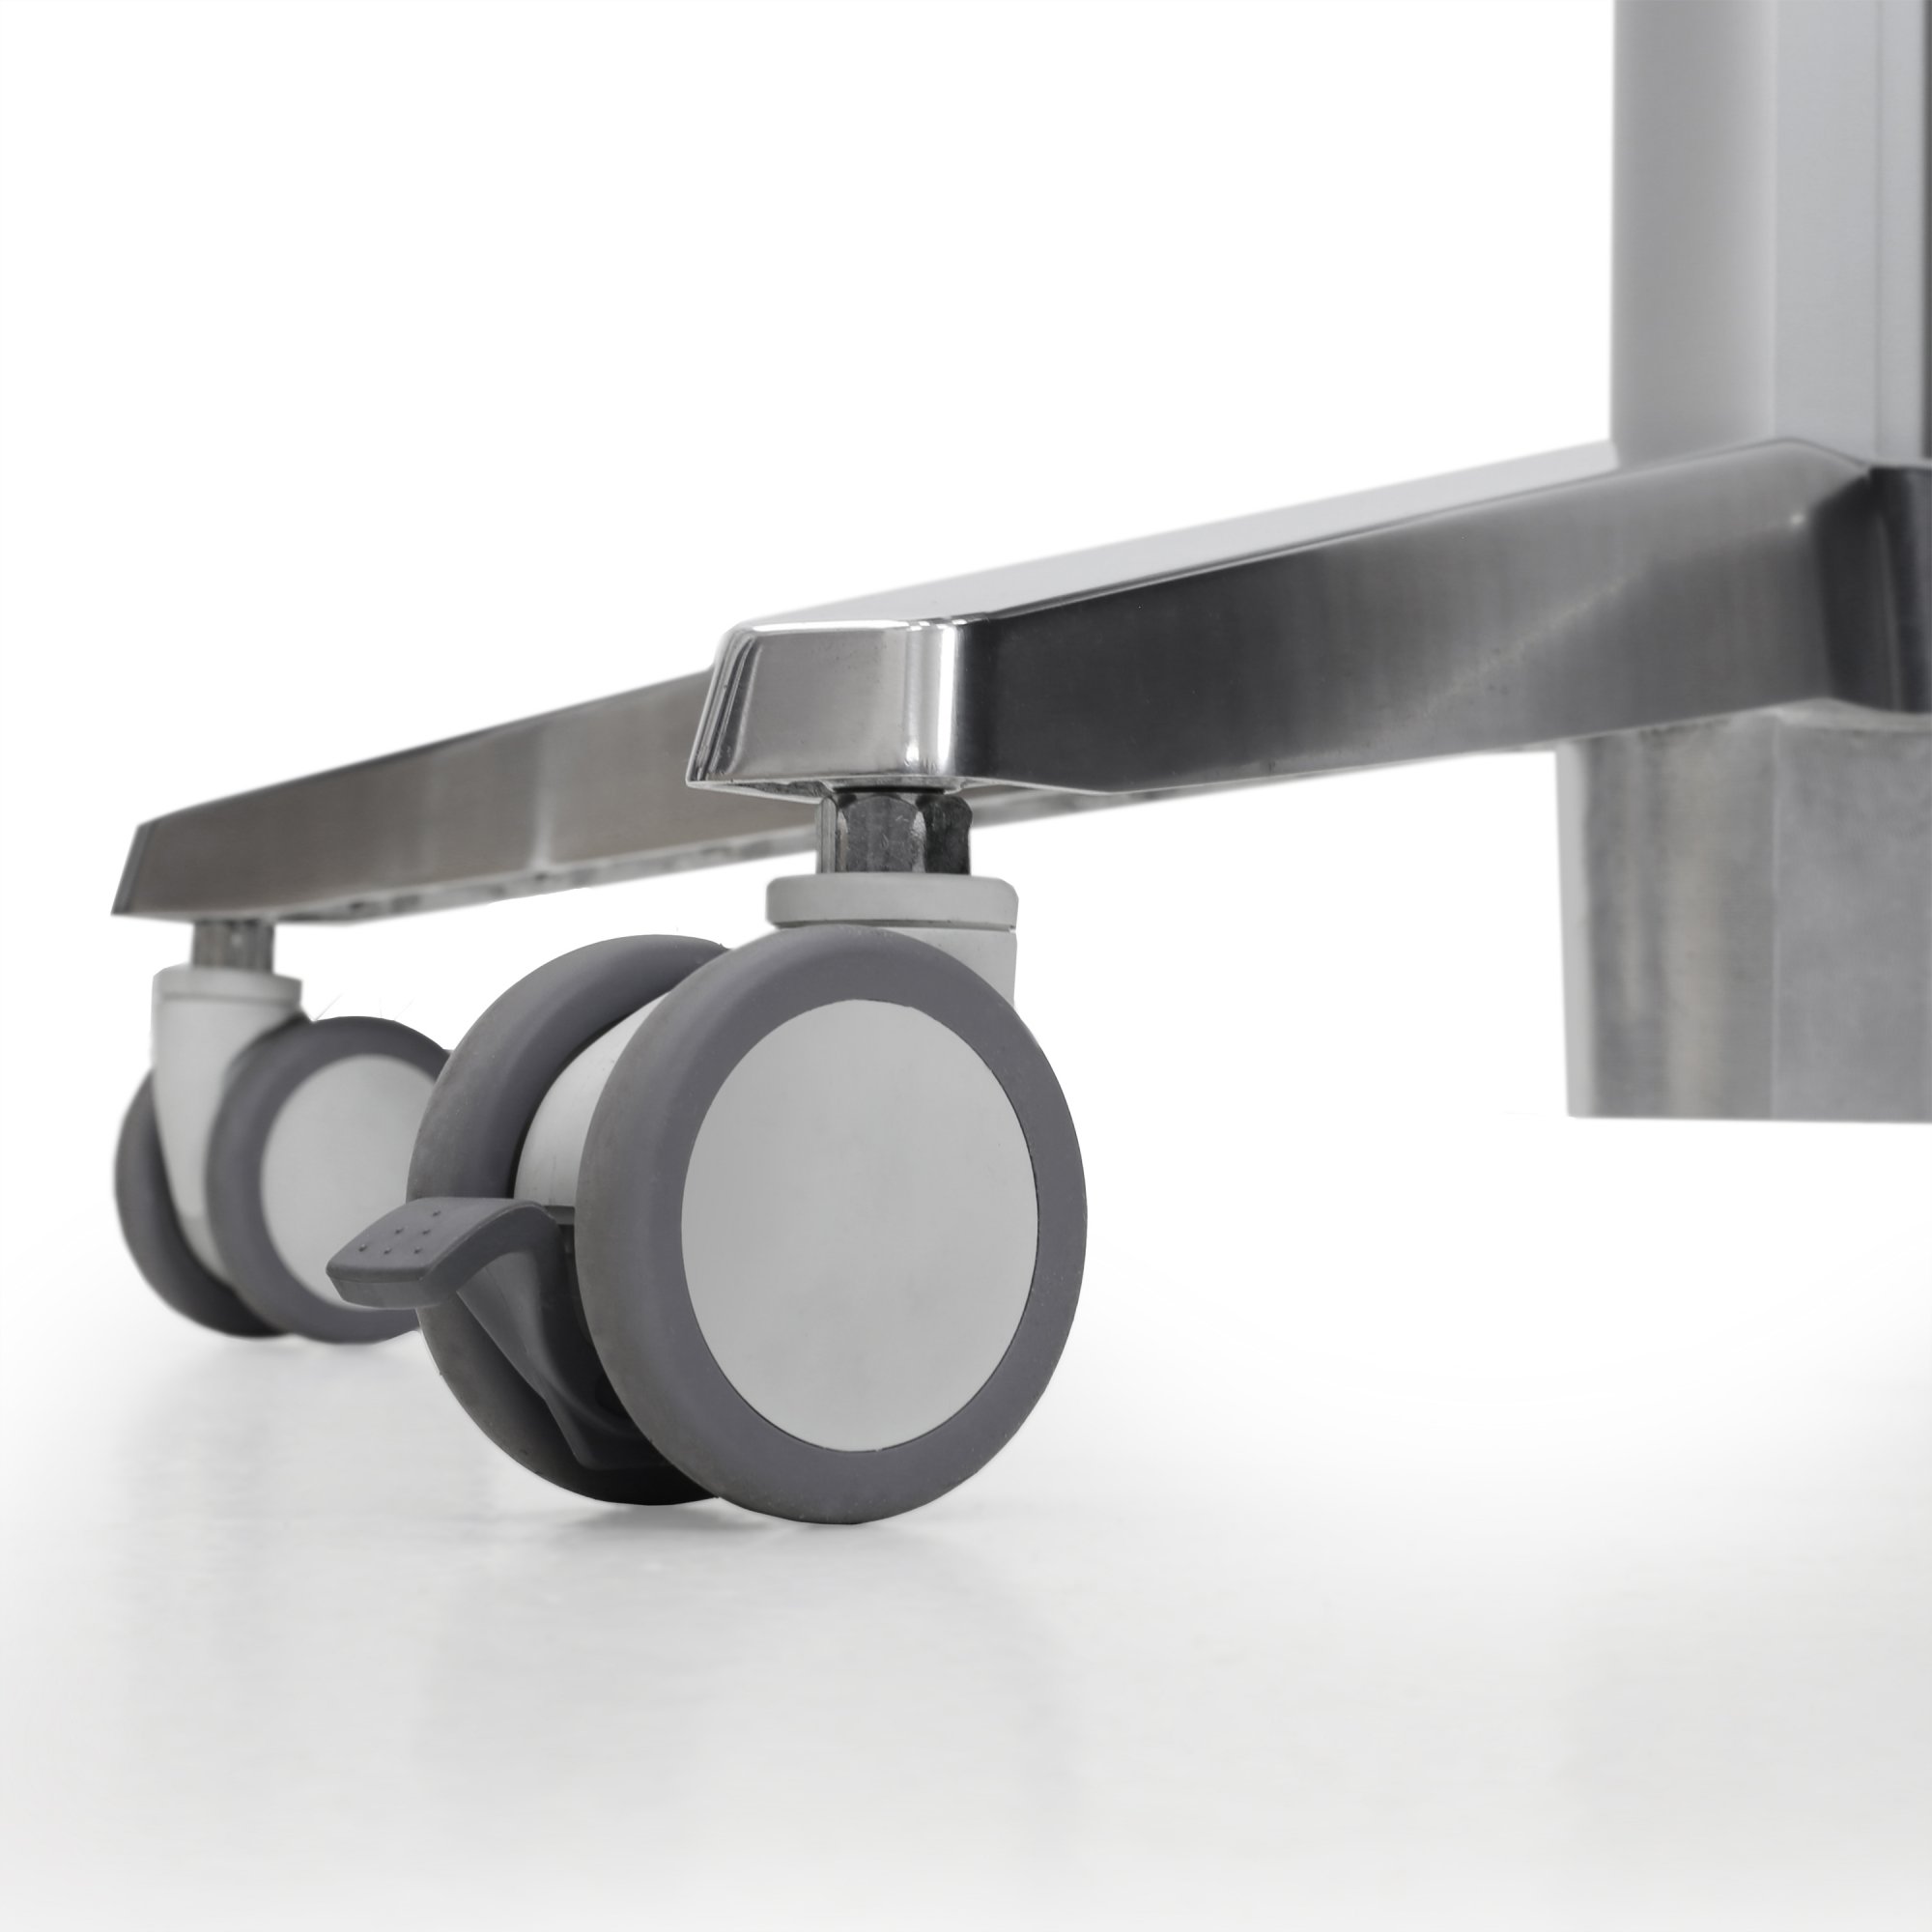 Lockable front casters can hold cart in place